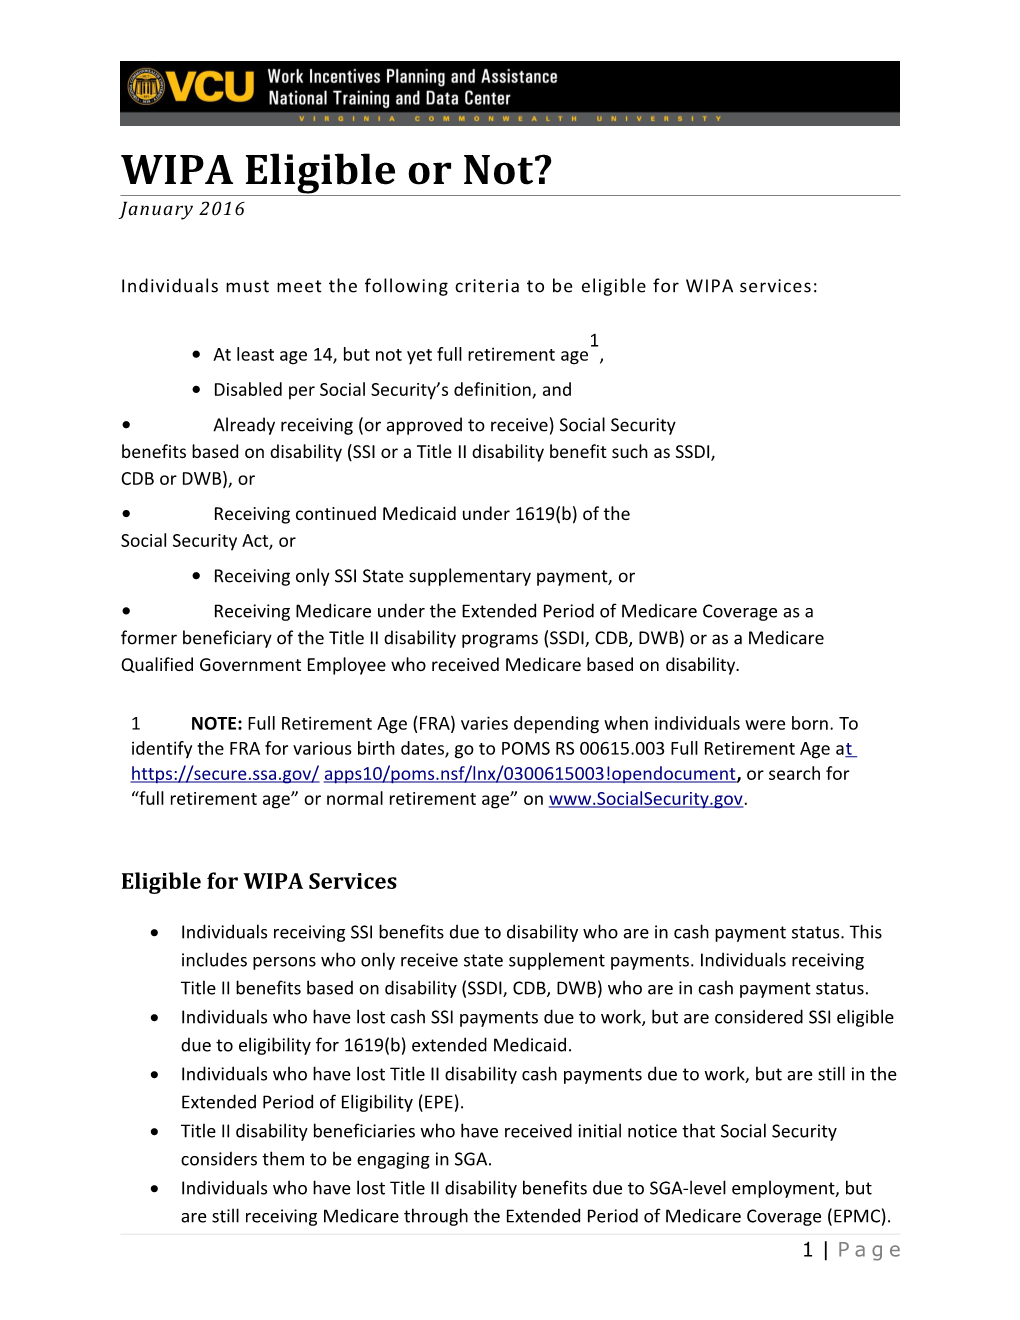 Individuals Must Meet the Following Criteria to Be Eligible for Wipaservices